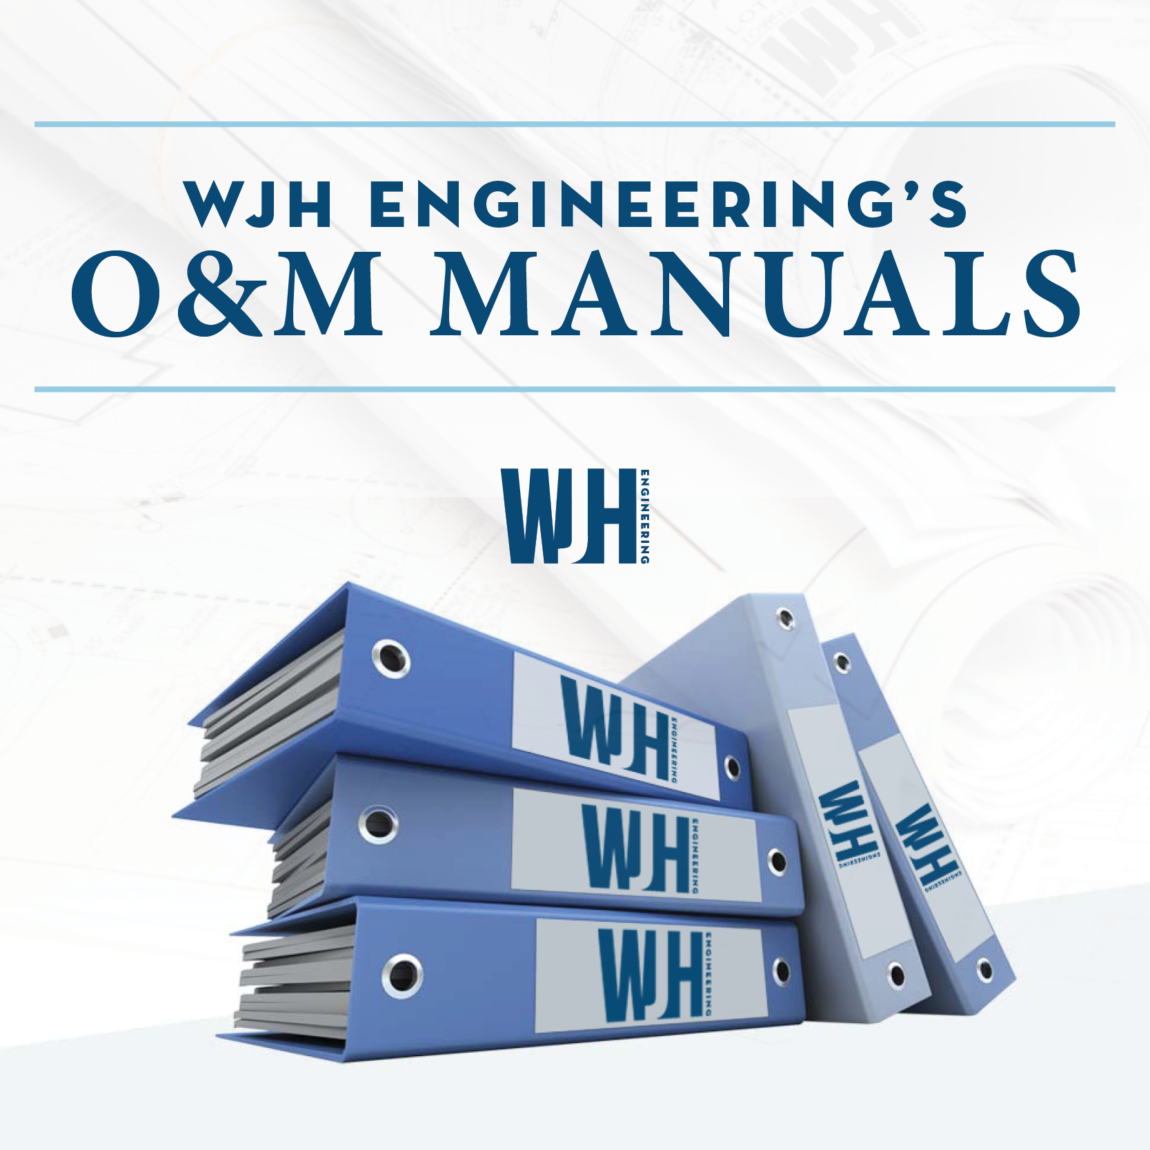 Operation & Maintenance Manual maintenance activities for all stormwater management systems